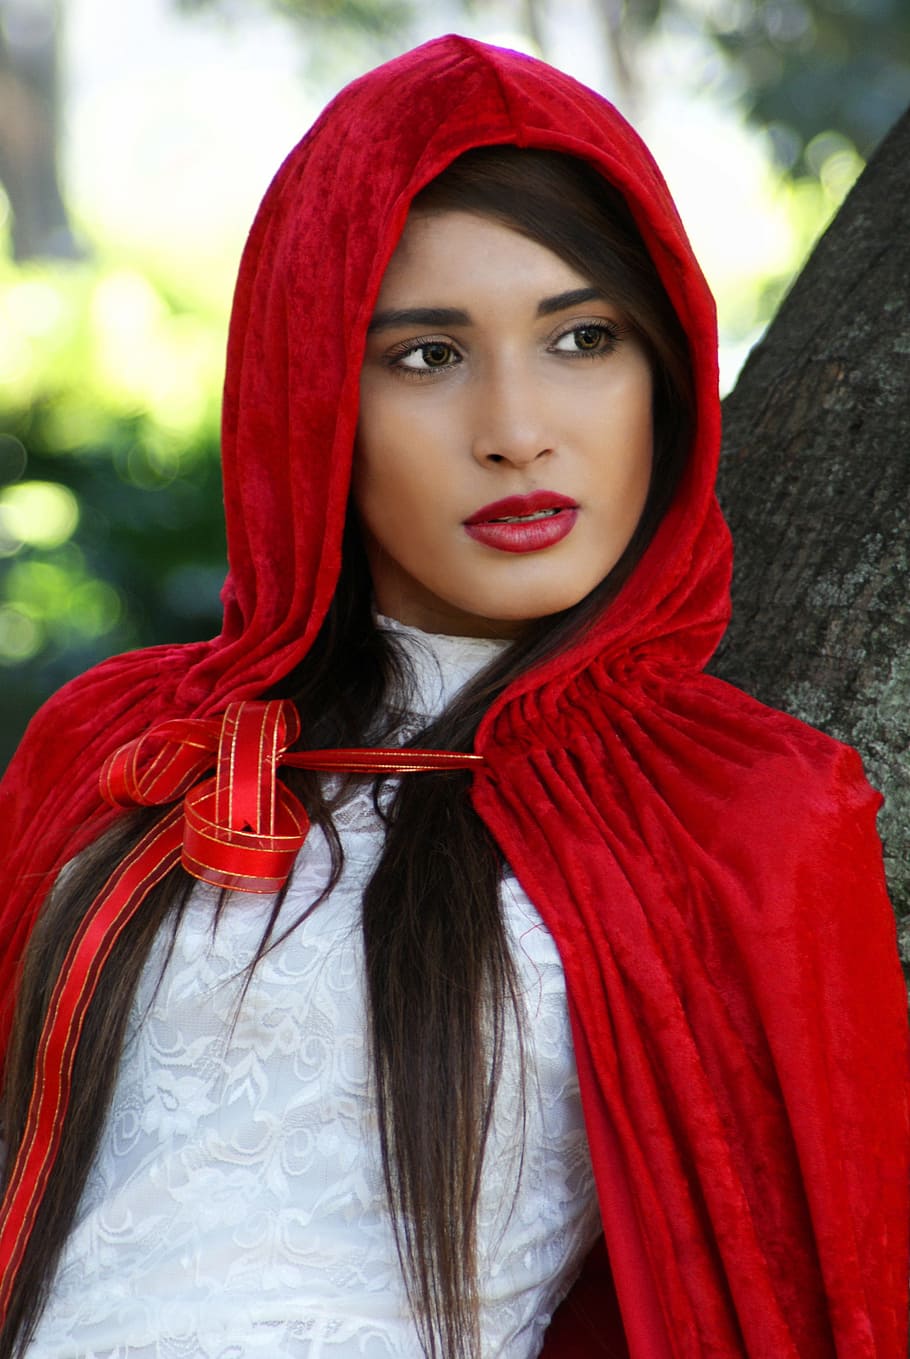 red riding hood, girl, hood, brown eyes, tree, ribbon, red, young adult, one person, portrait